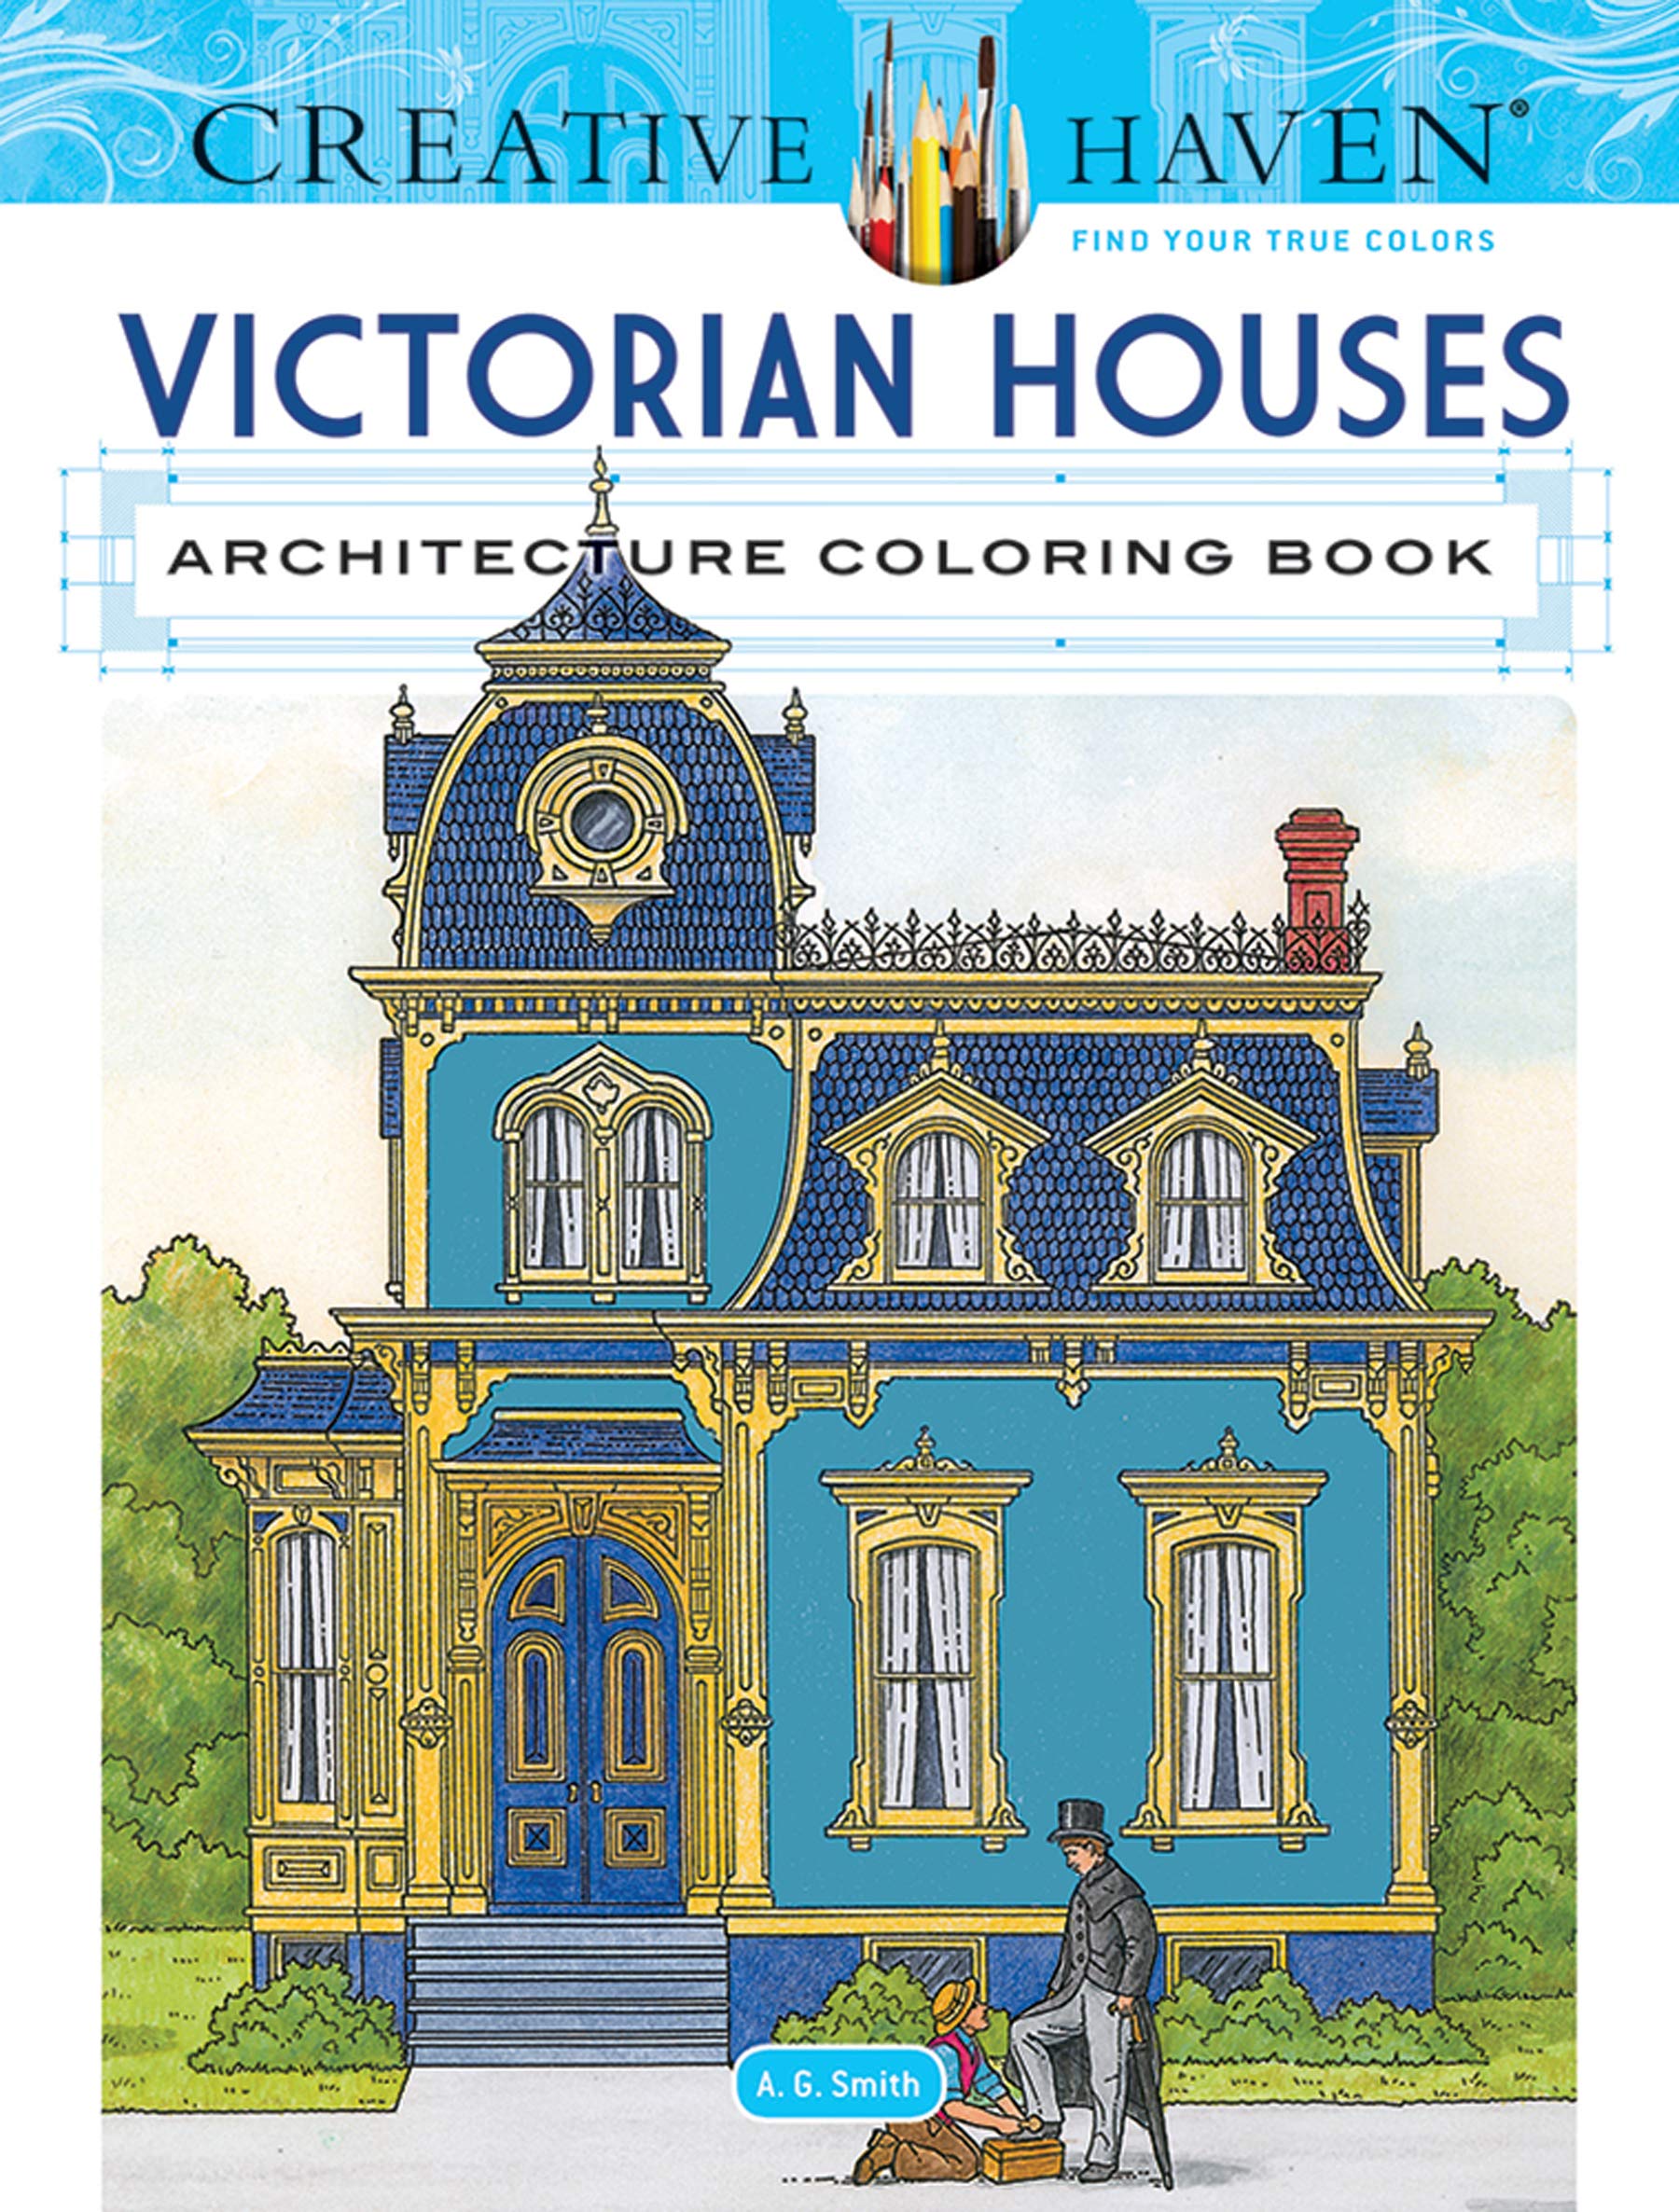 Victorian Houses Architecture Coloring Book